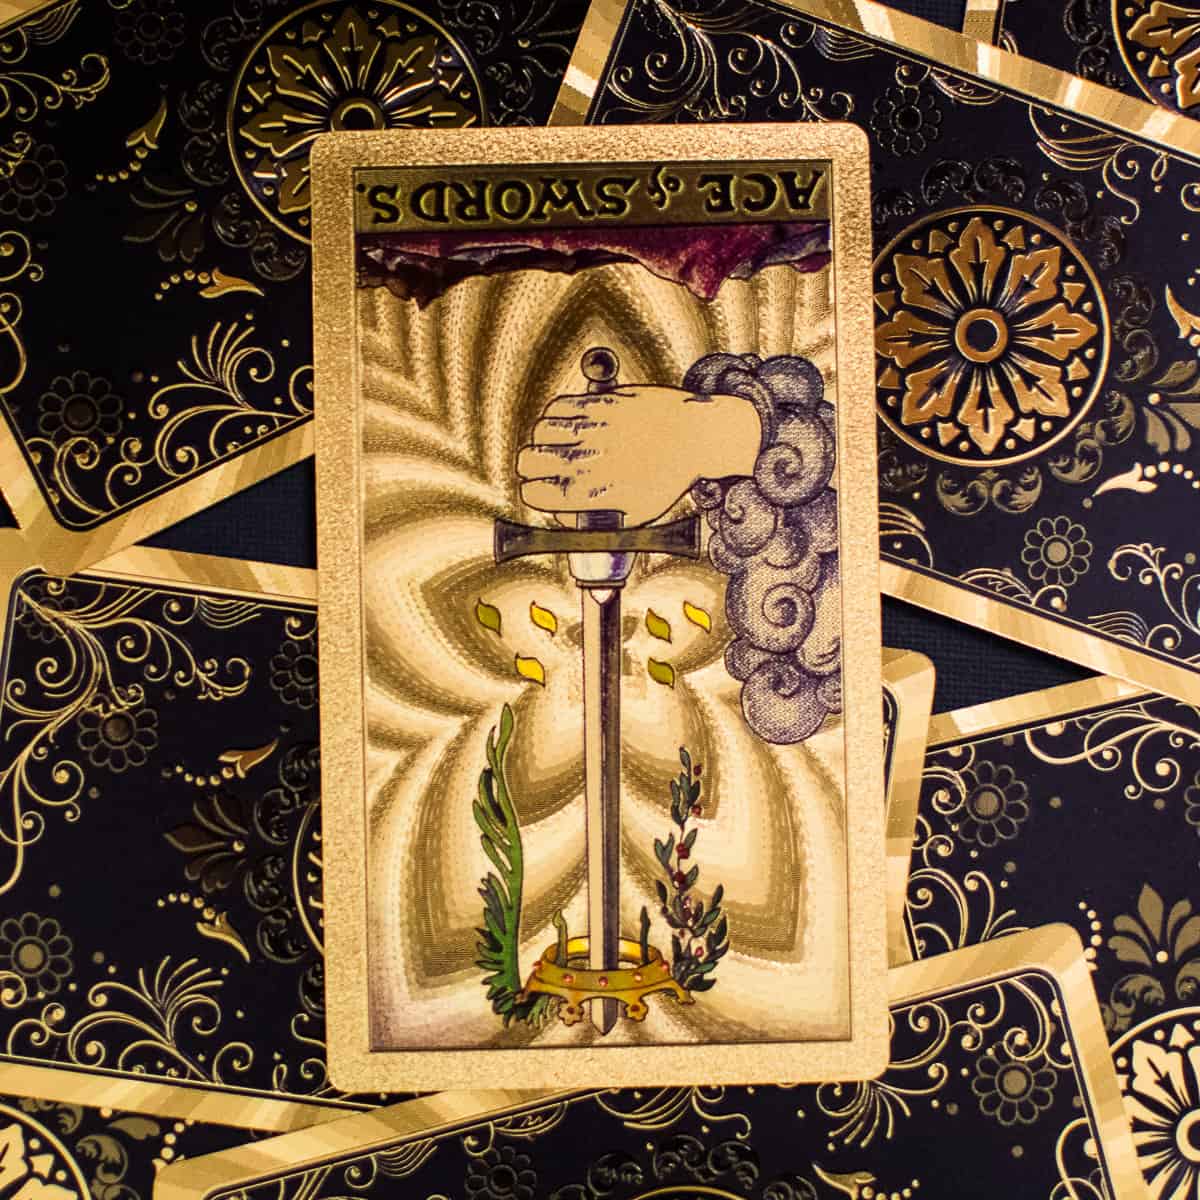 Ace of Swords tarot card shown in the reverse position depicting a single hand and sword emerging from a cloud.